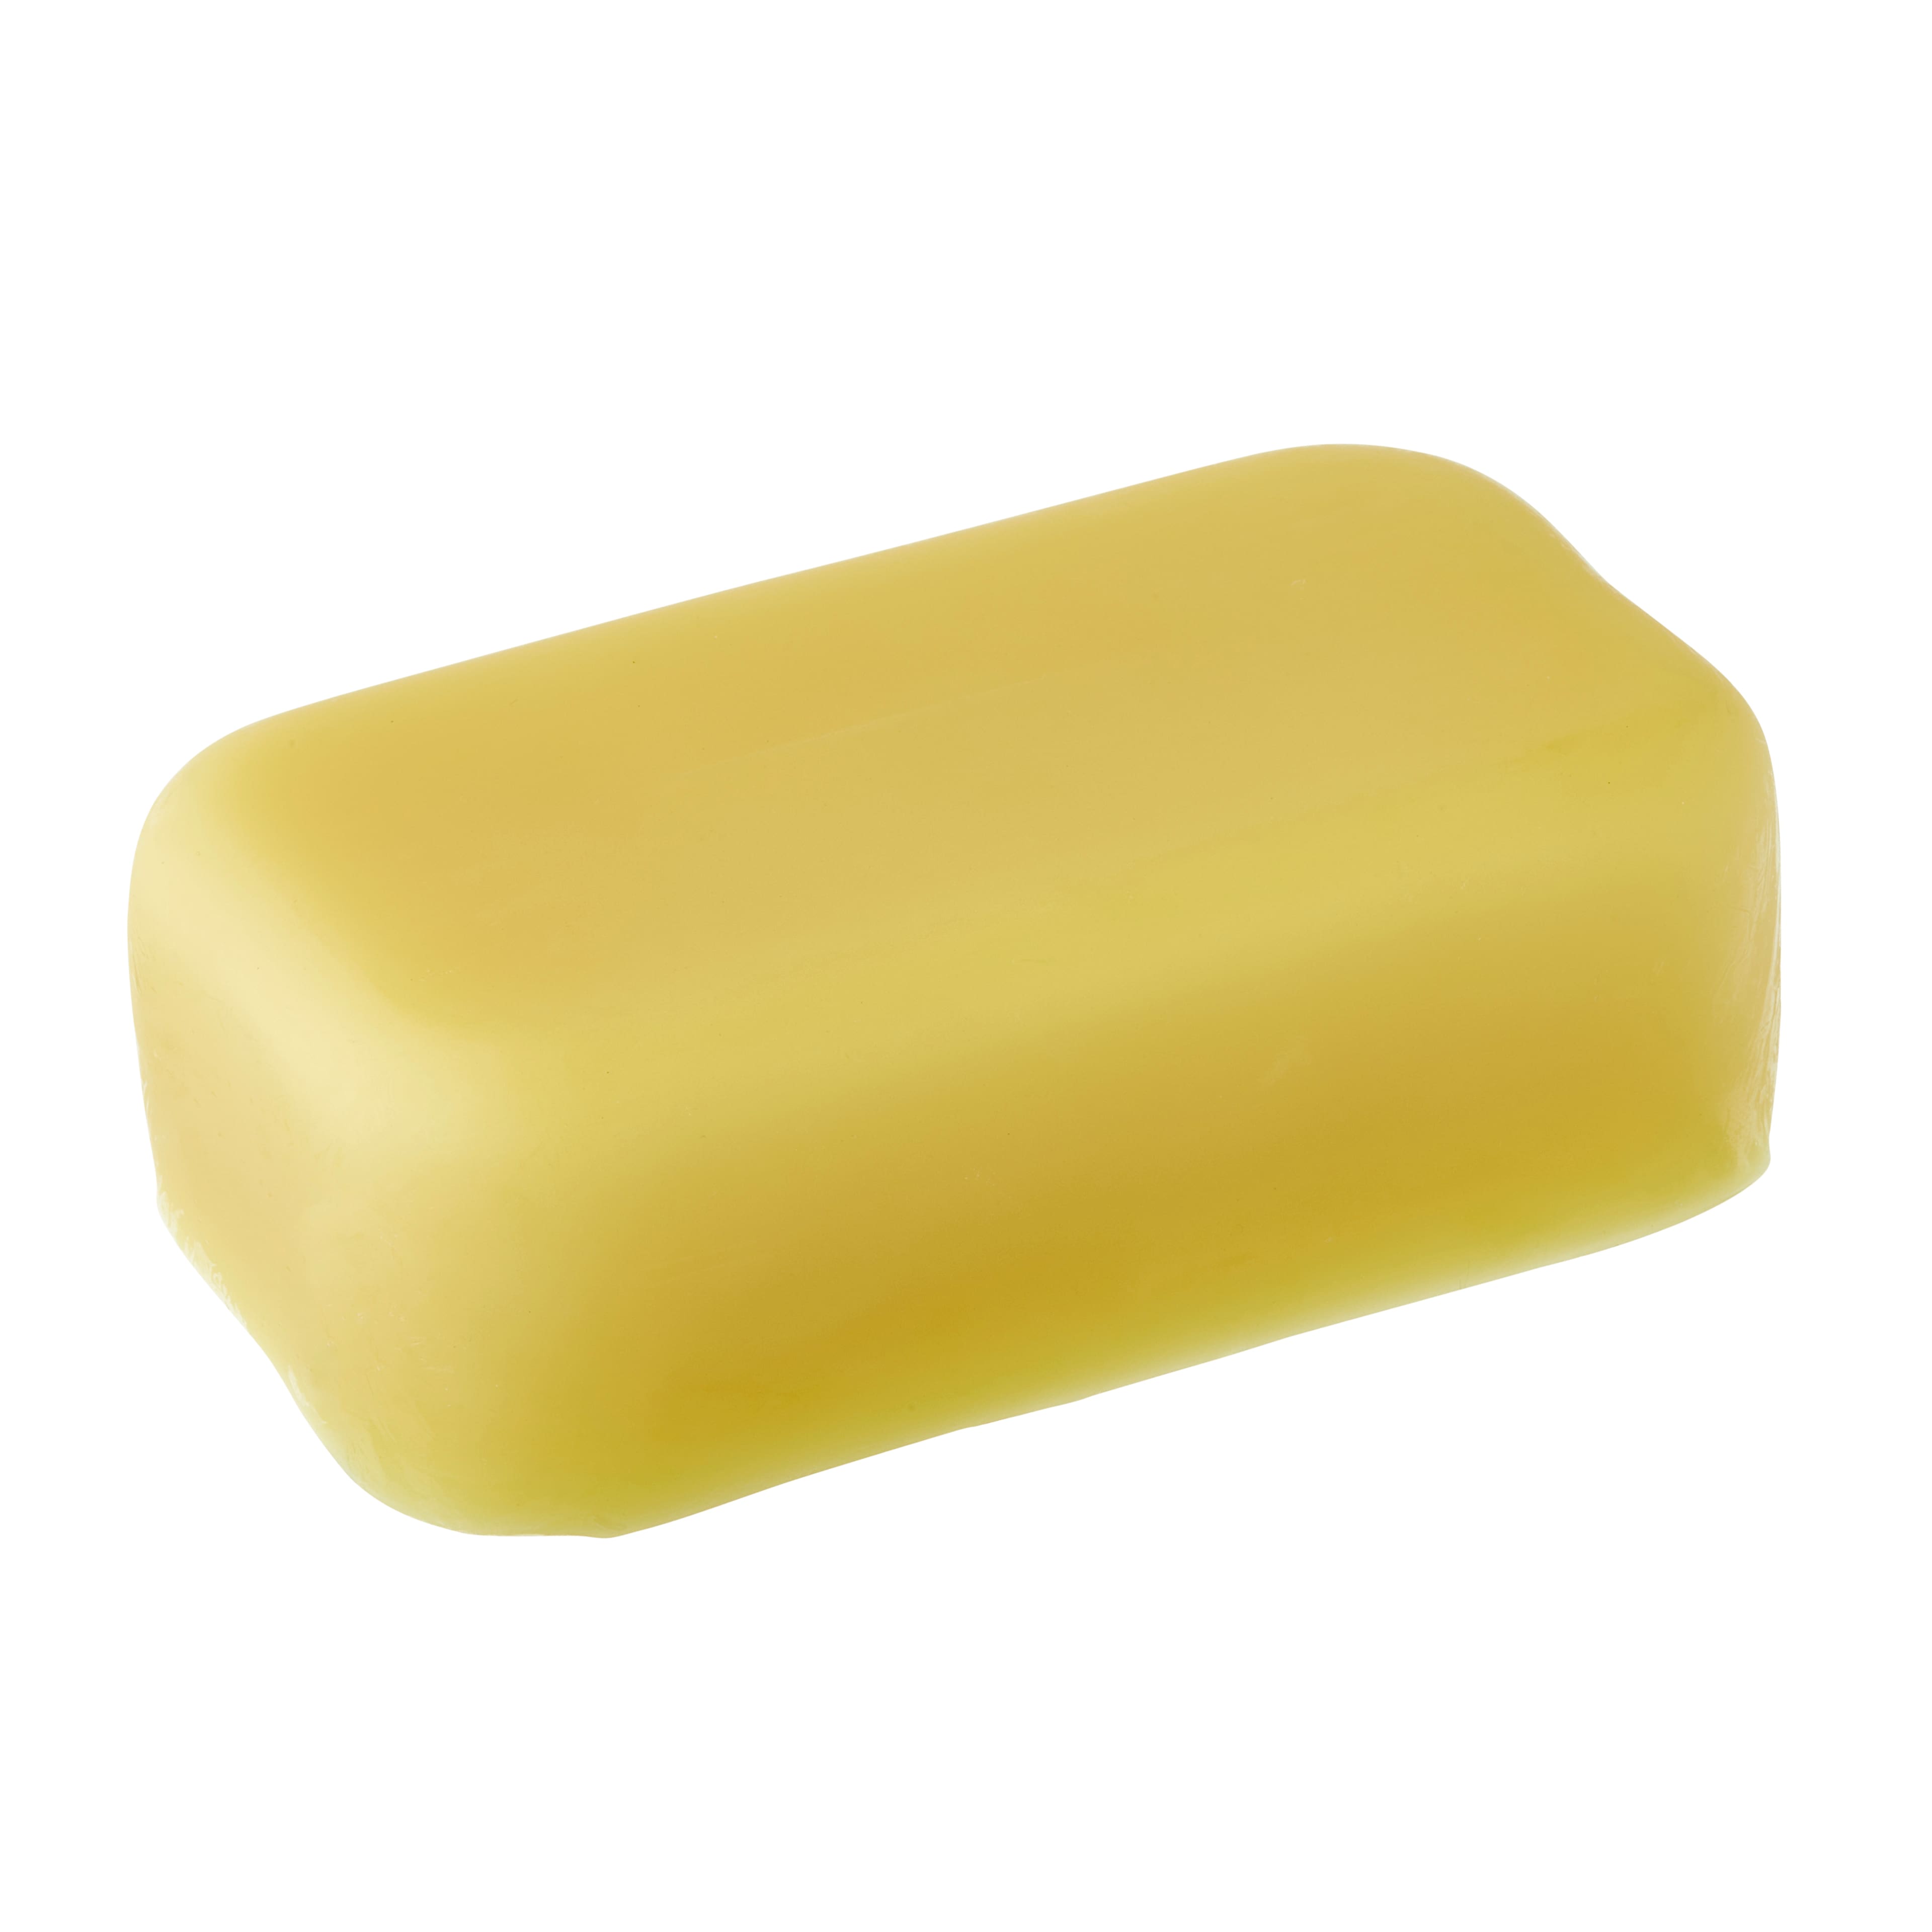 Misc - Beeswax Pastilles (Yellow) - 1oz. · Mystic Wonders NM · Online Store  Powered by Storenvy